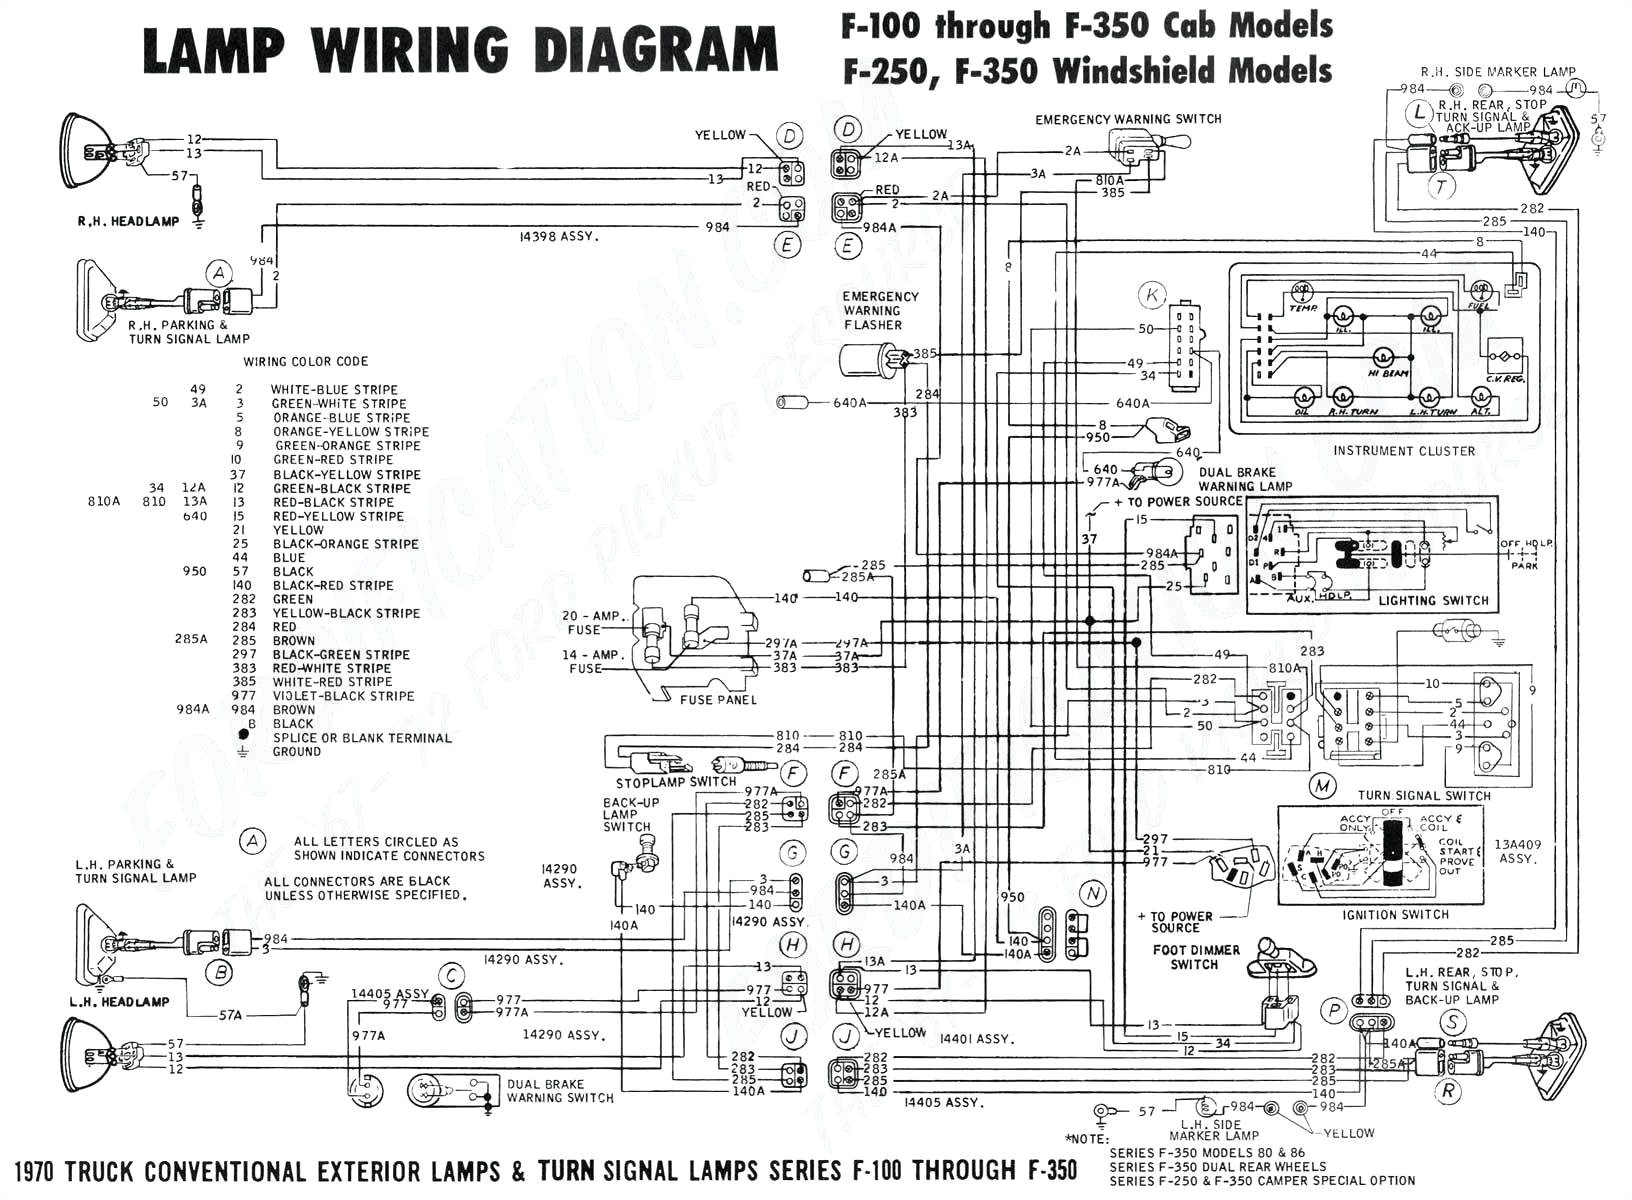 ford f250 trailer wiring harness diagram ford f 350 wiring diagram wiring data rh unroutine co 2006 ford f350 wiring diagram ford super duty wiring diagram 15m jpg